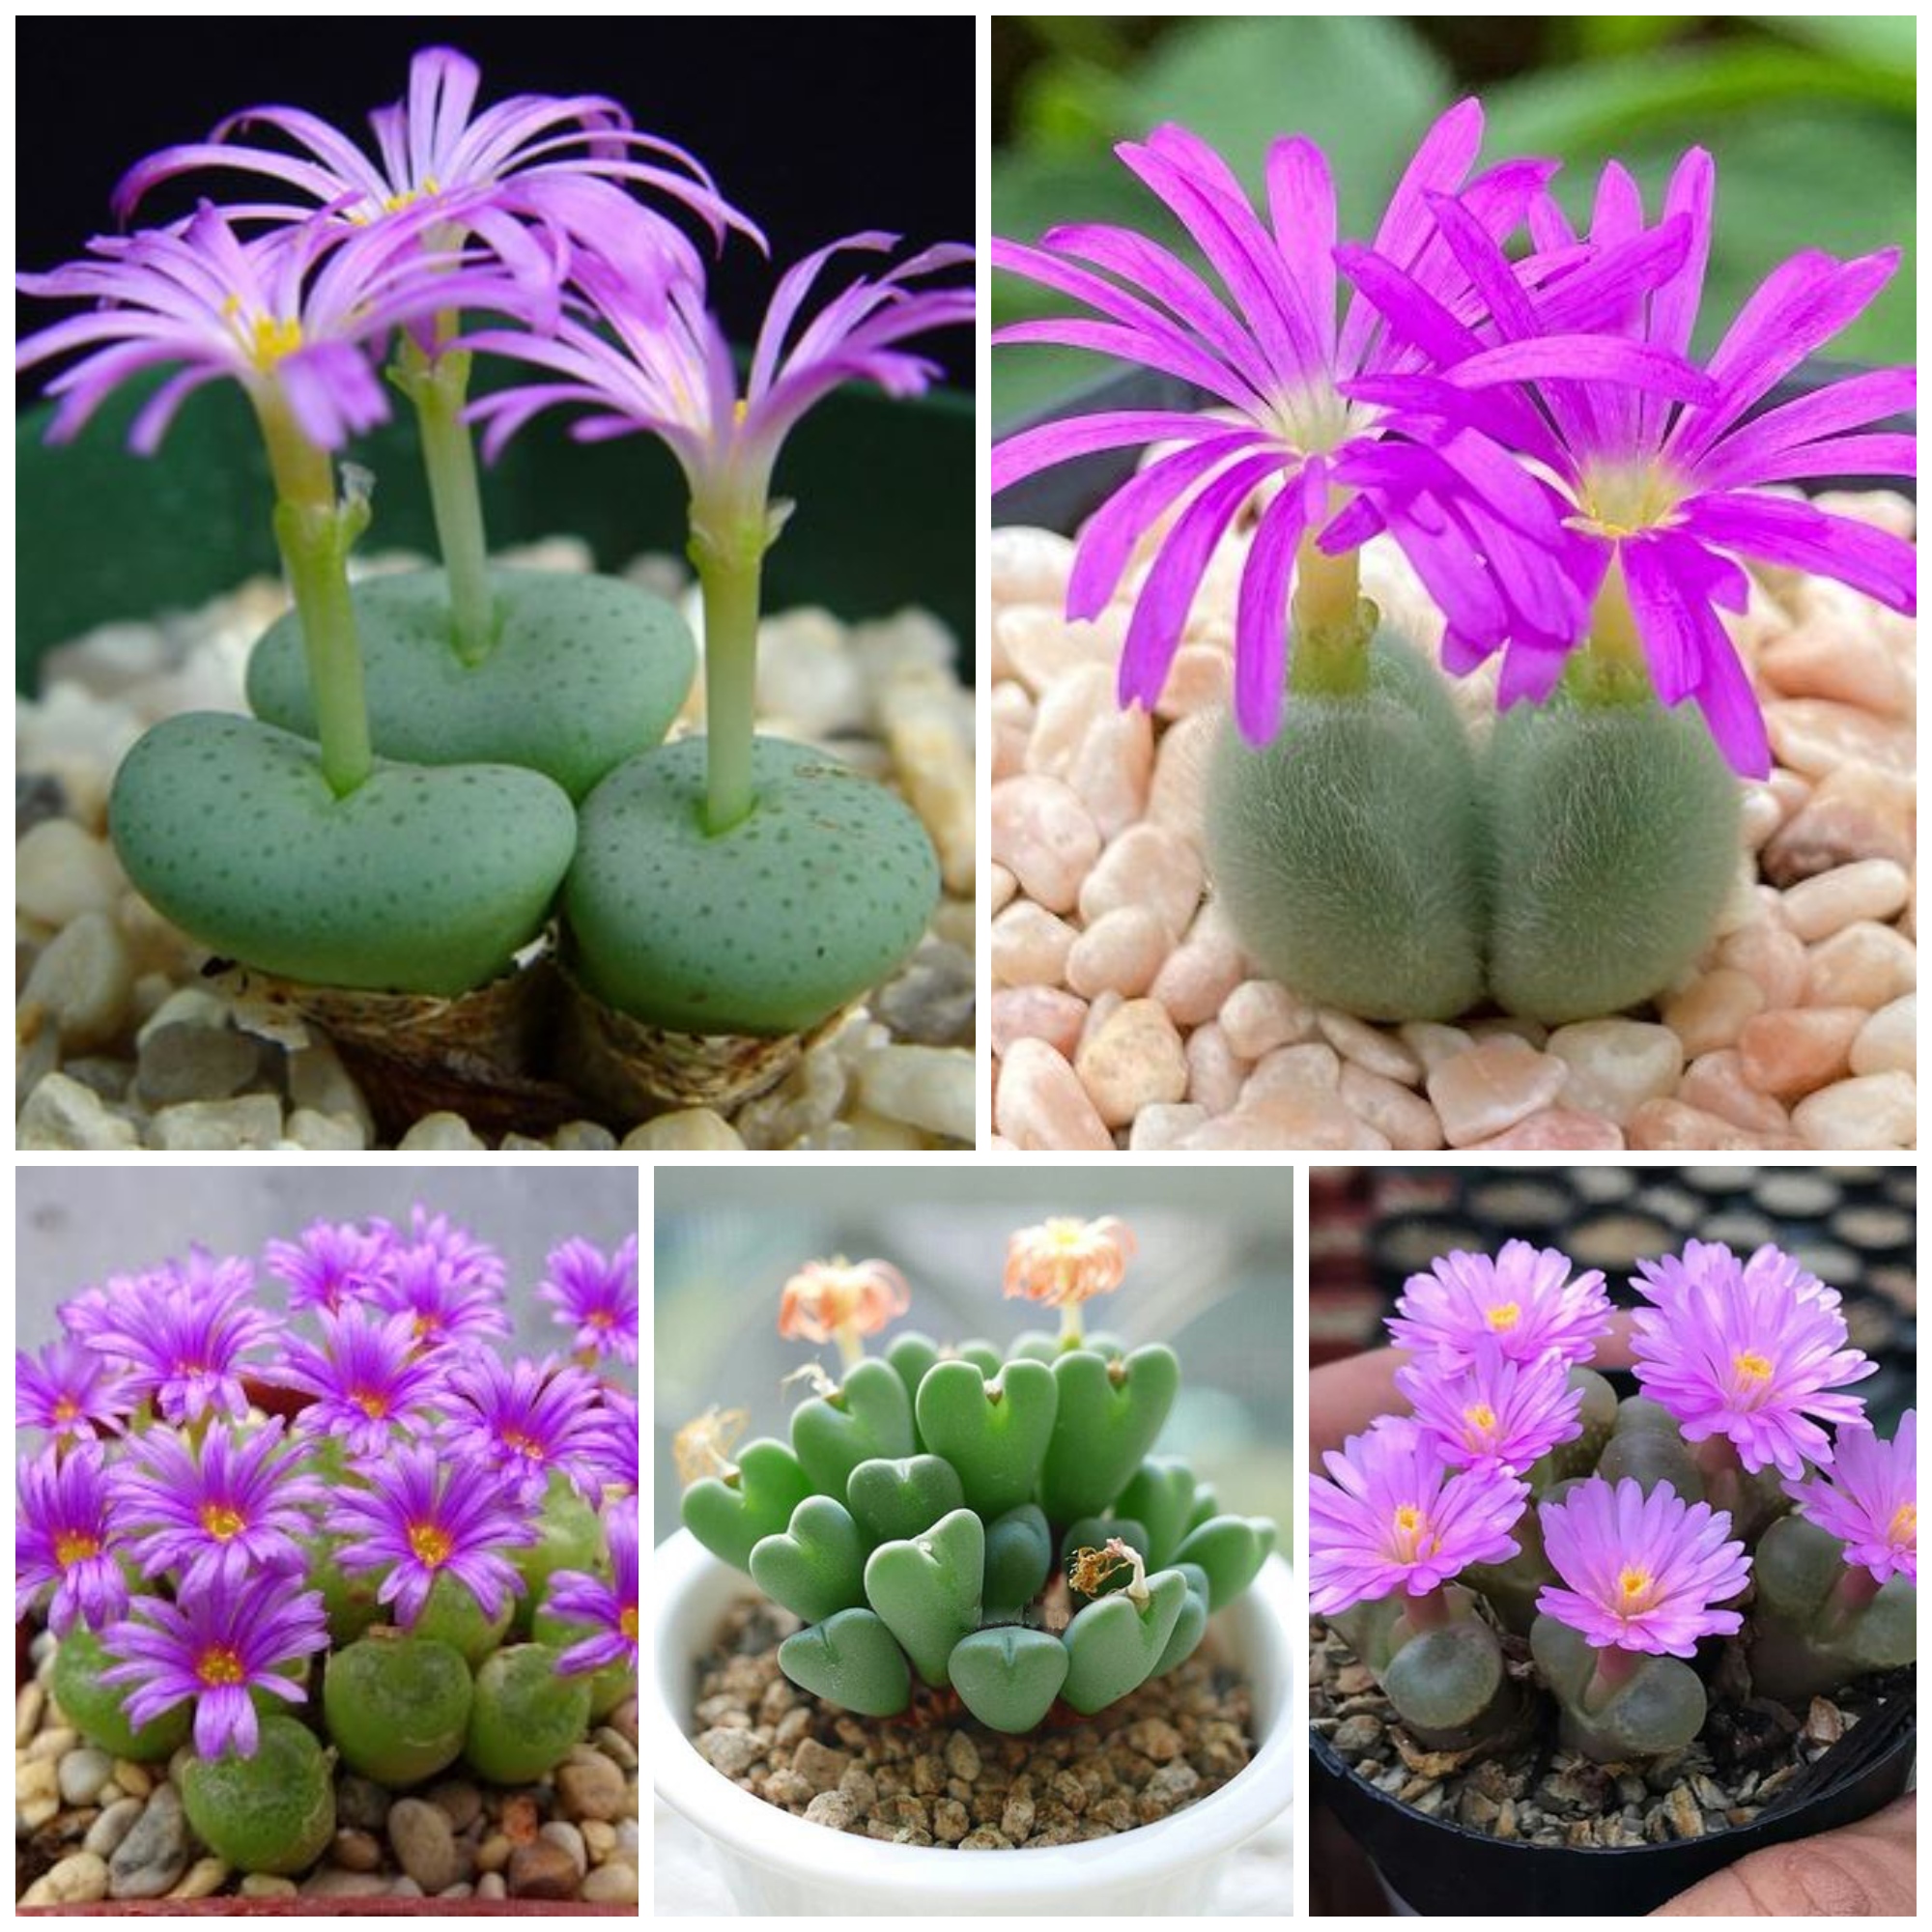 How to Grow and Care for Conophytum